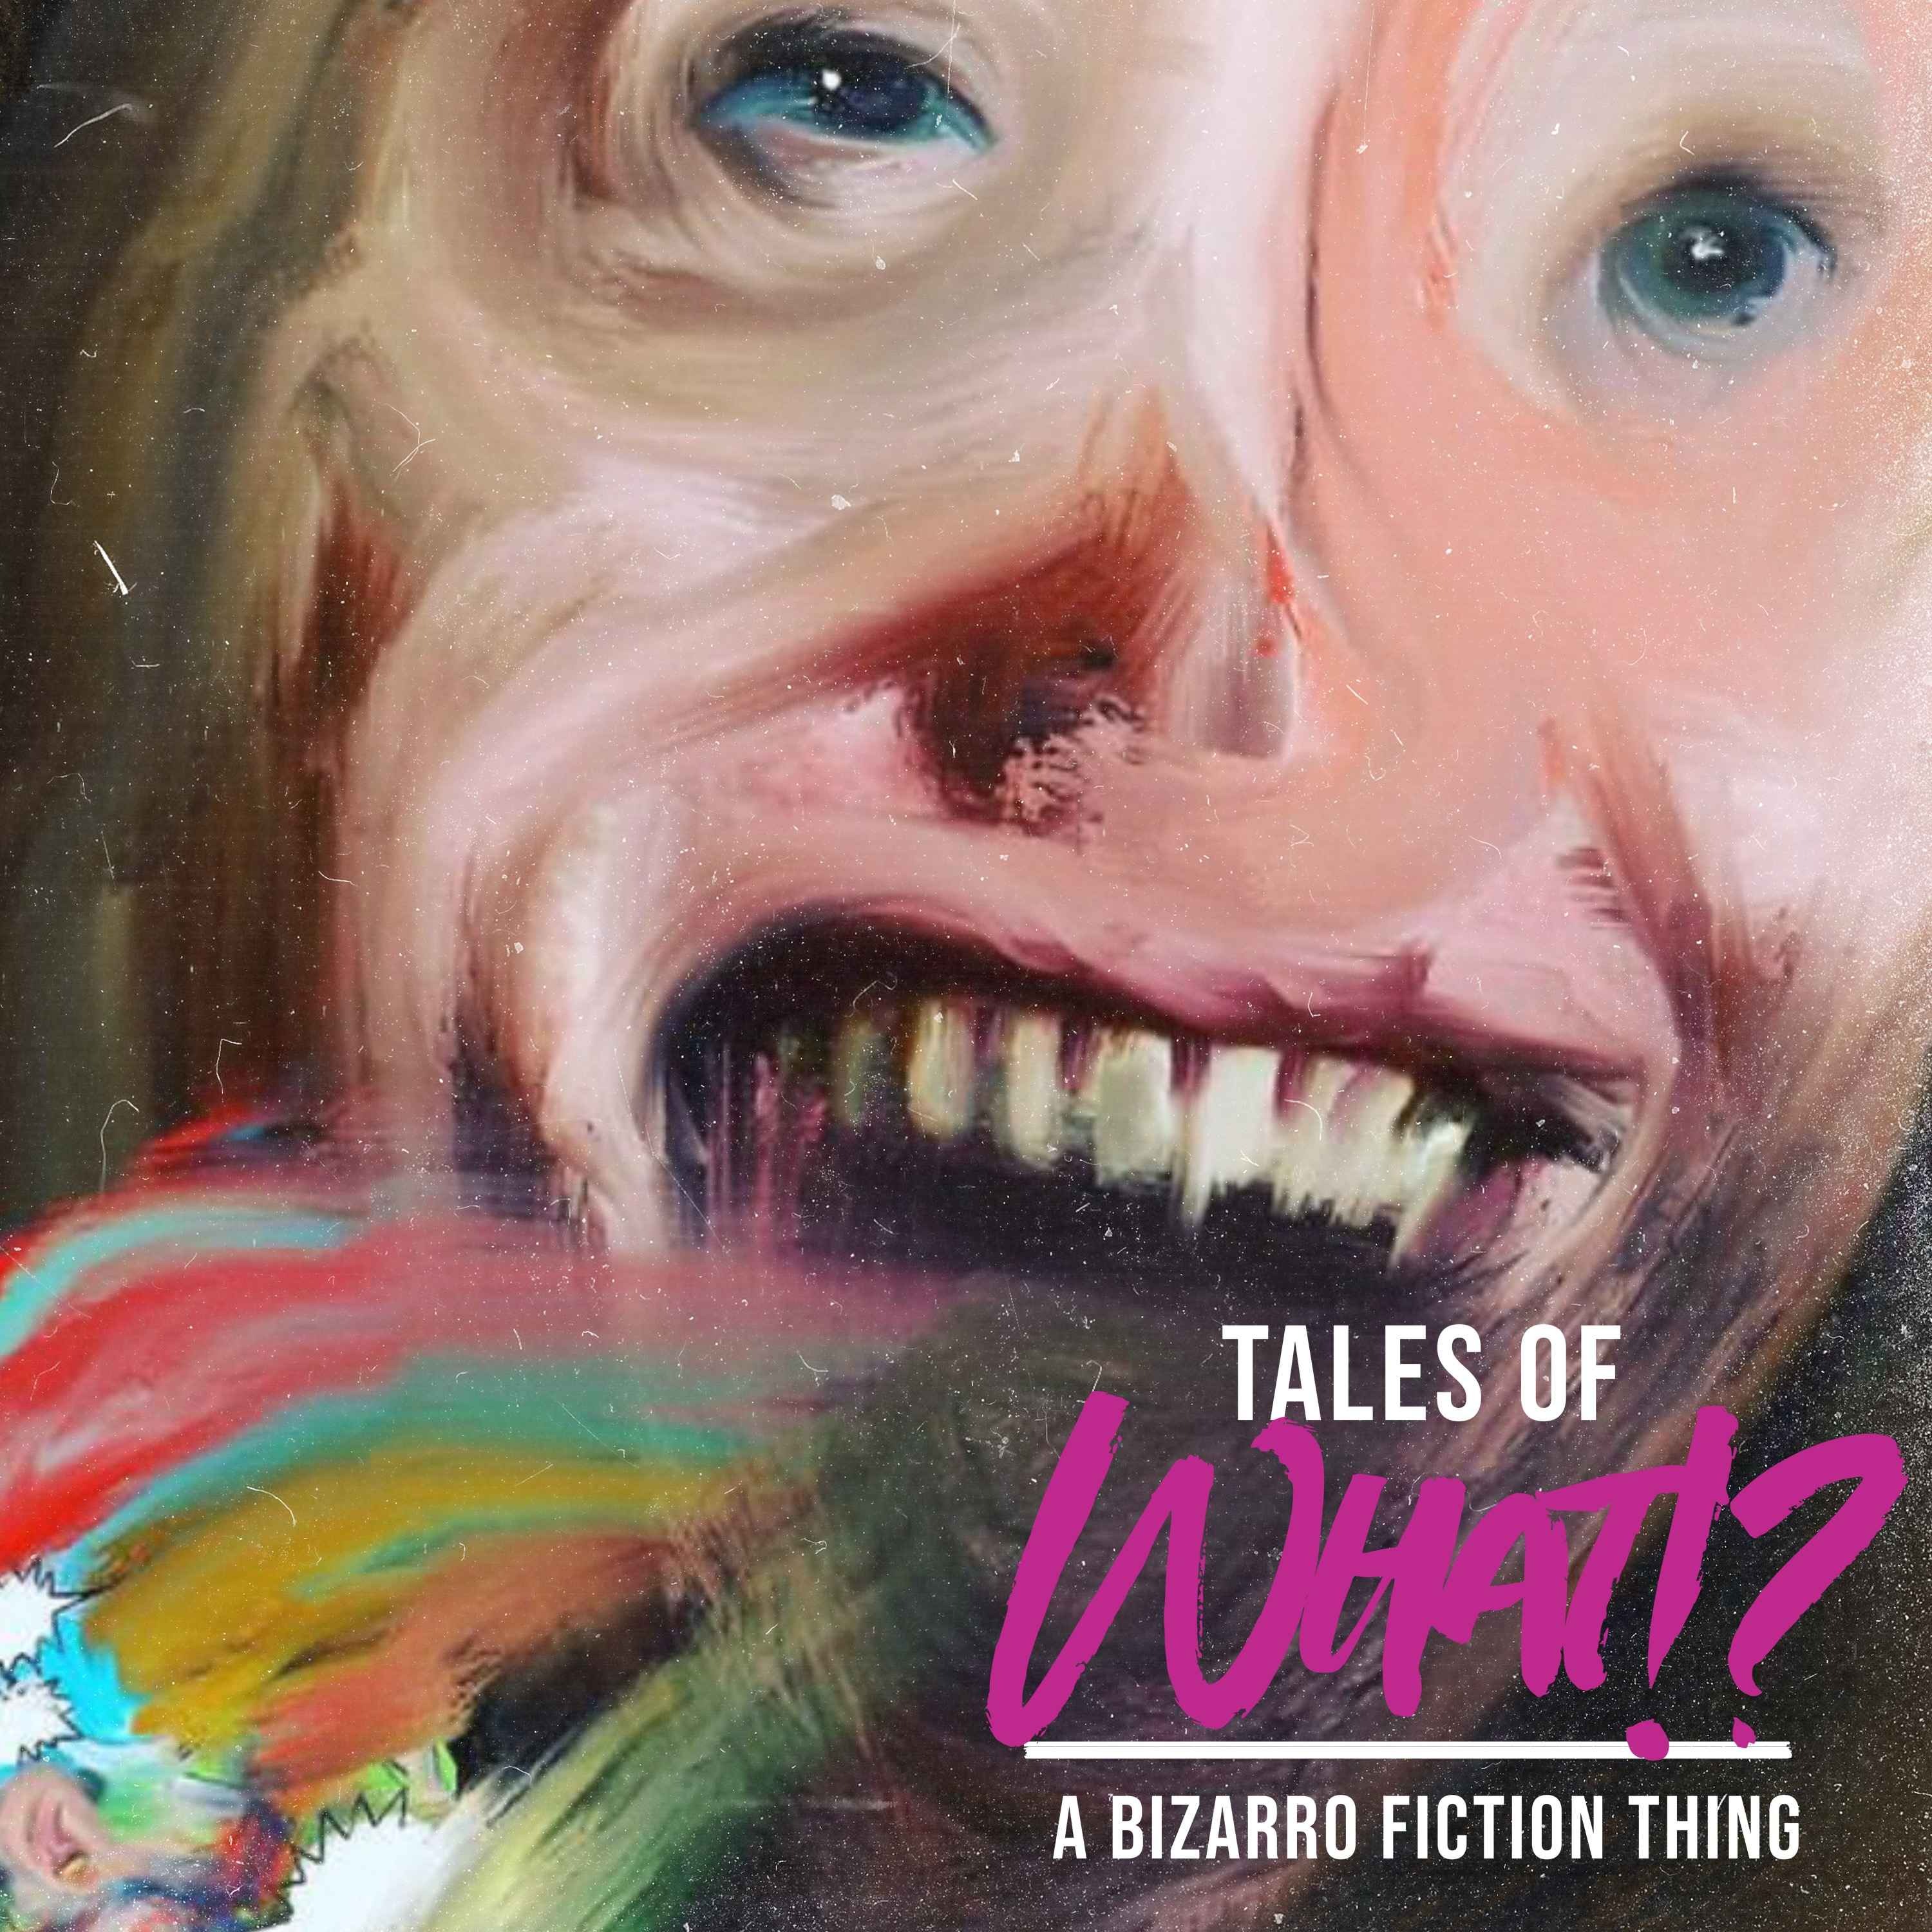 Tales of What!? - A Bizarro Fiction Thing